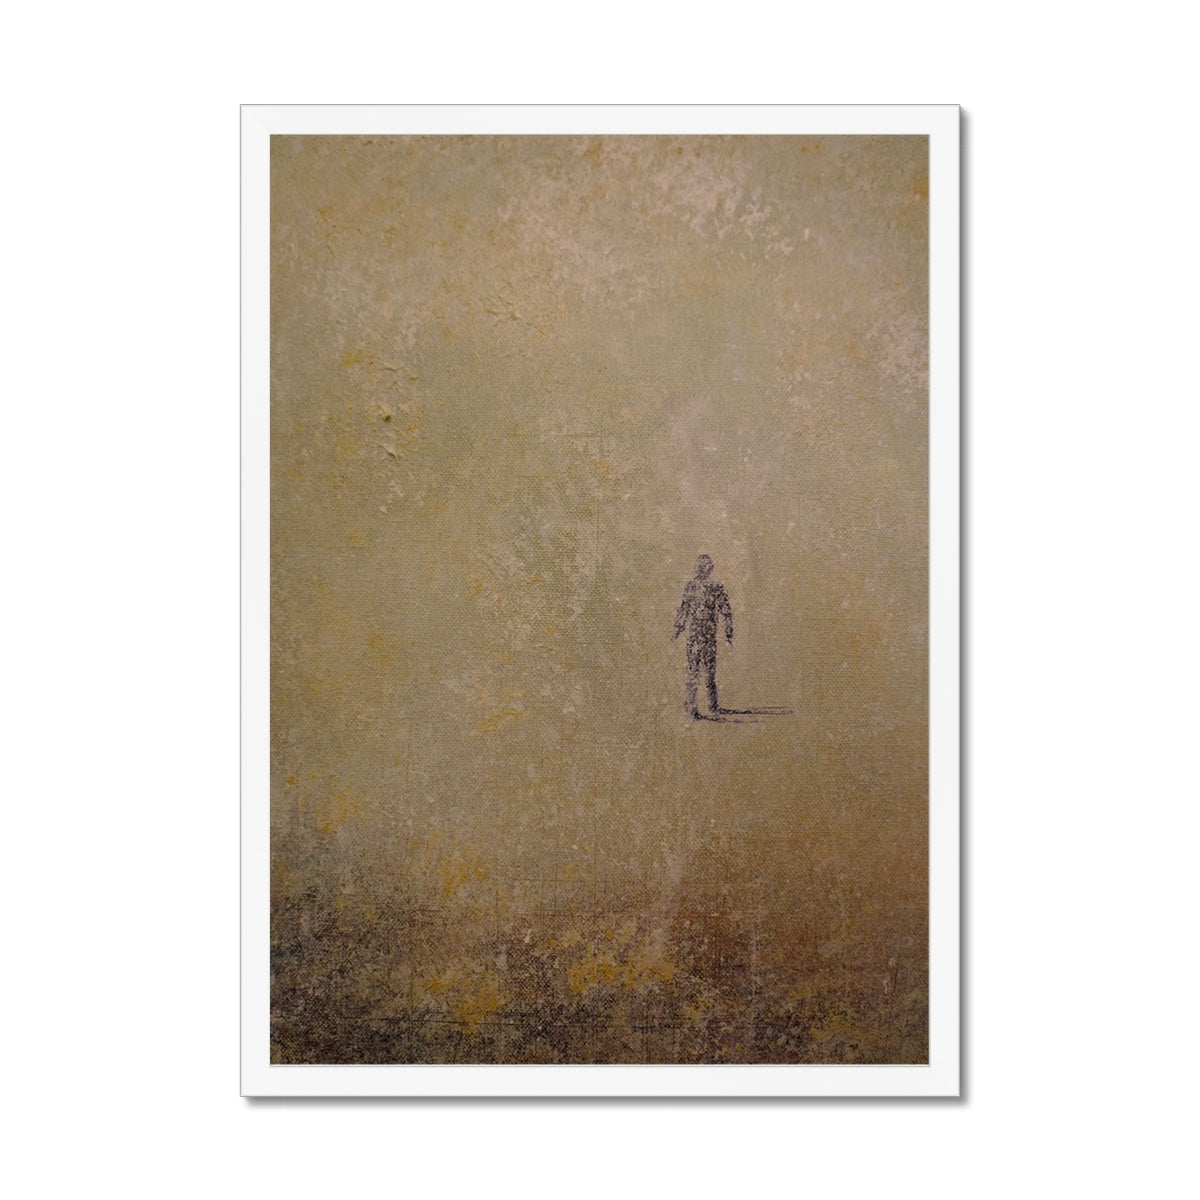 Into The Munro Mist Painting | Framed Prints From Scotland-Framed Prints-Abstract & Impressionistic Art Gallery-A2 Portrait-White Frame-Paintings, Prints, Homeware, Art Gifts From Scotland By Scottish Artist Kevin Hunter